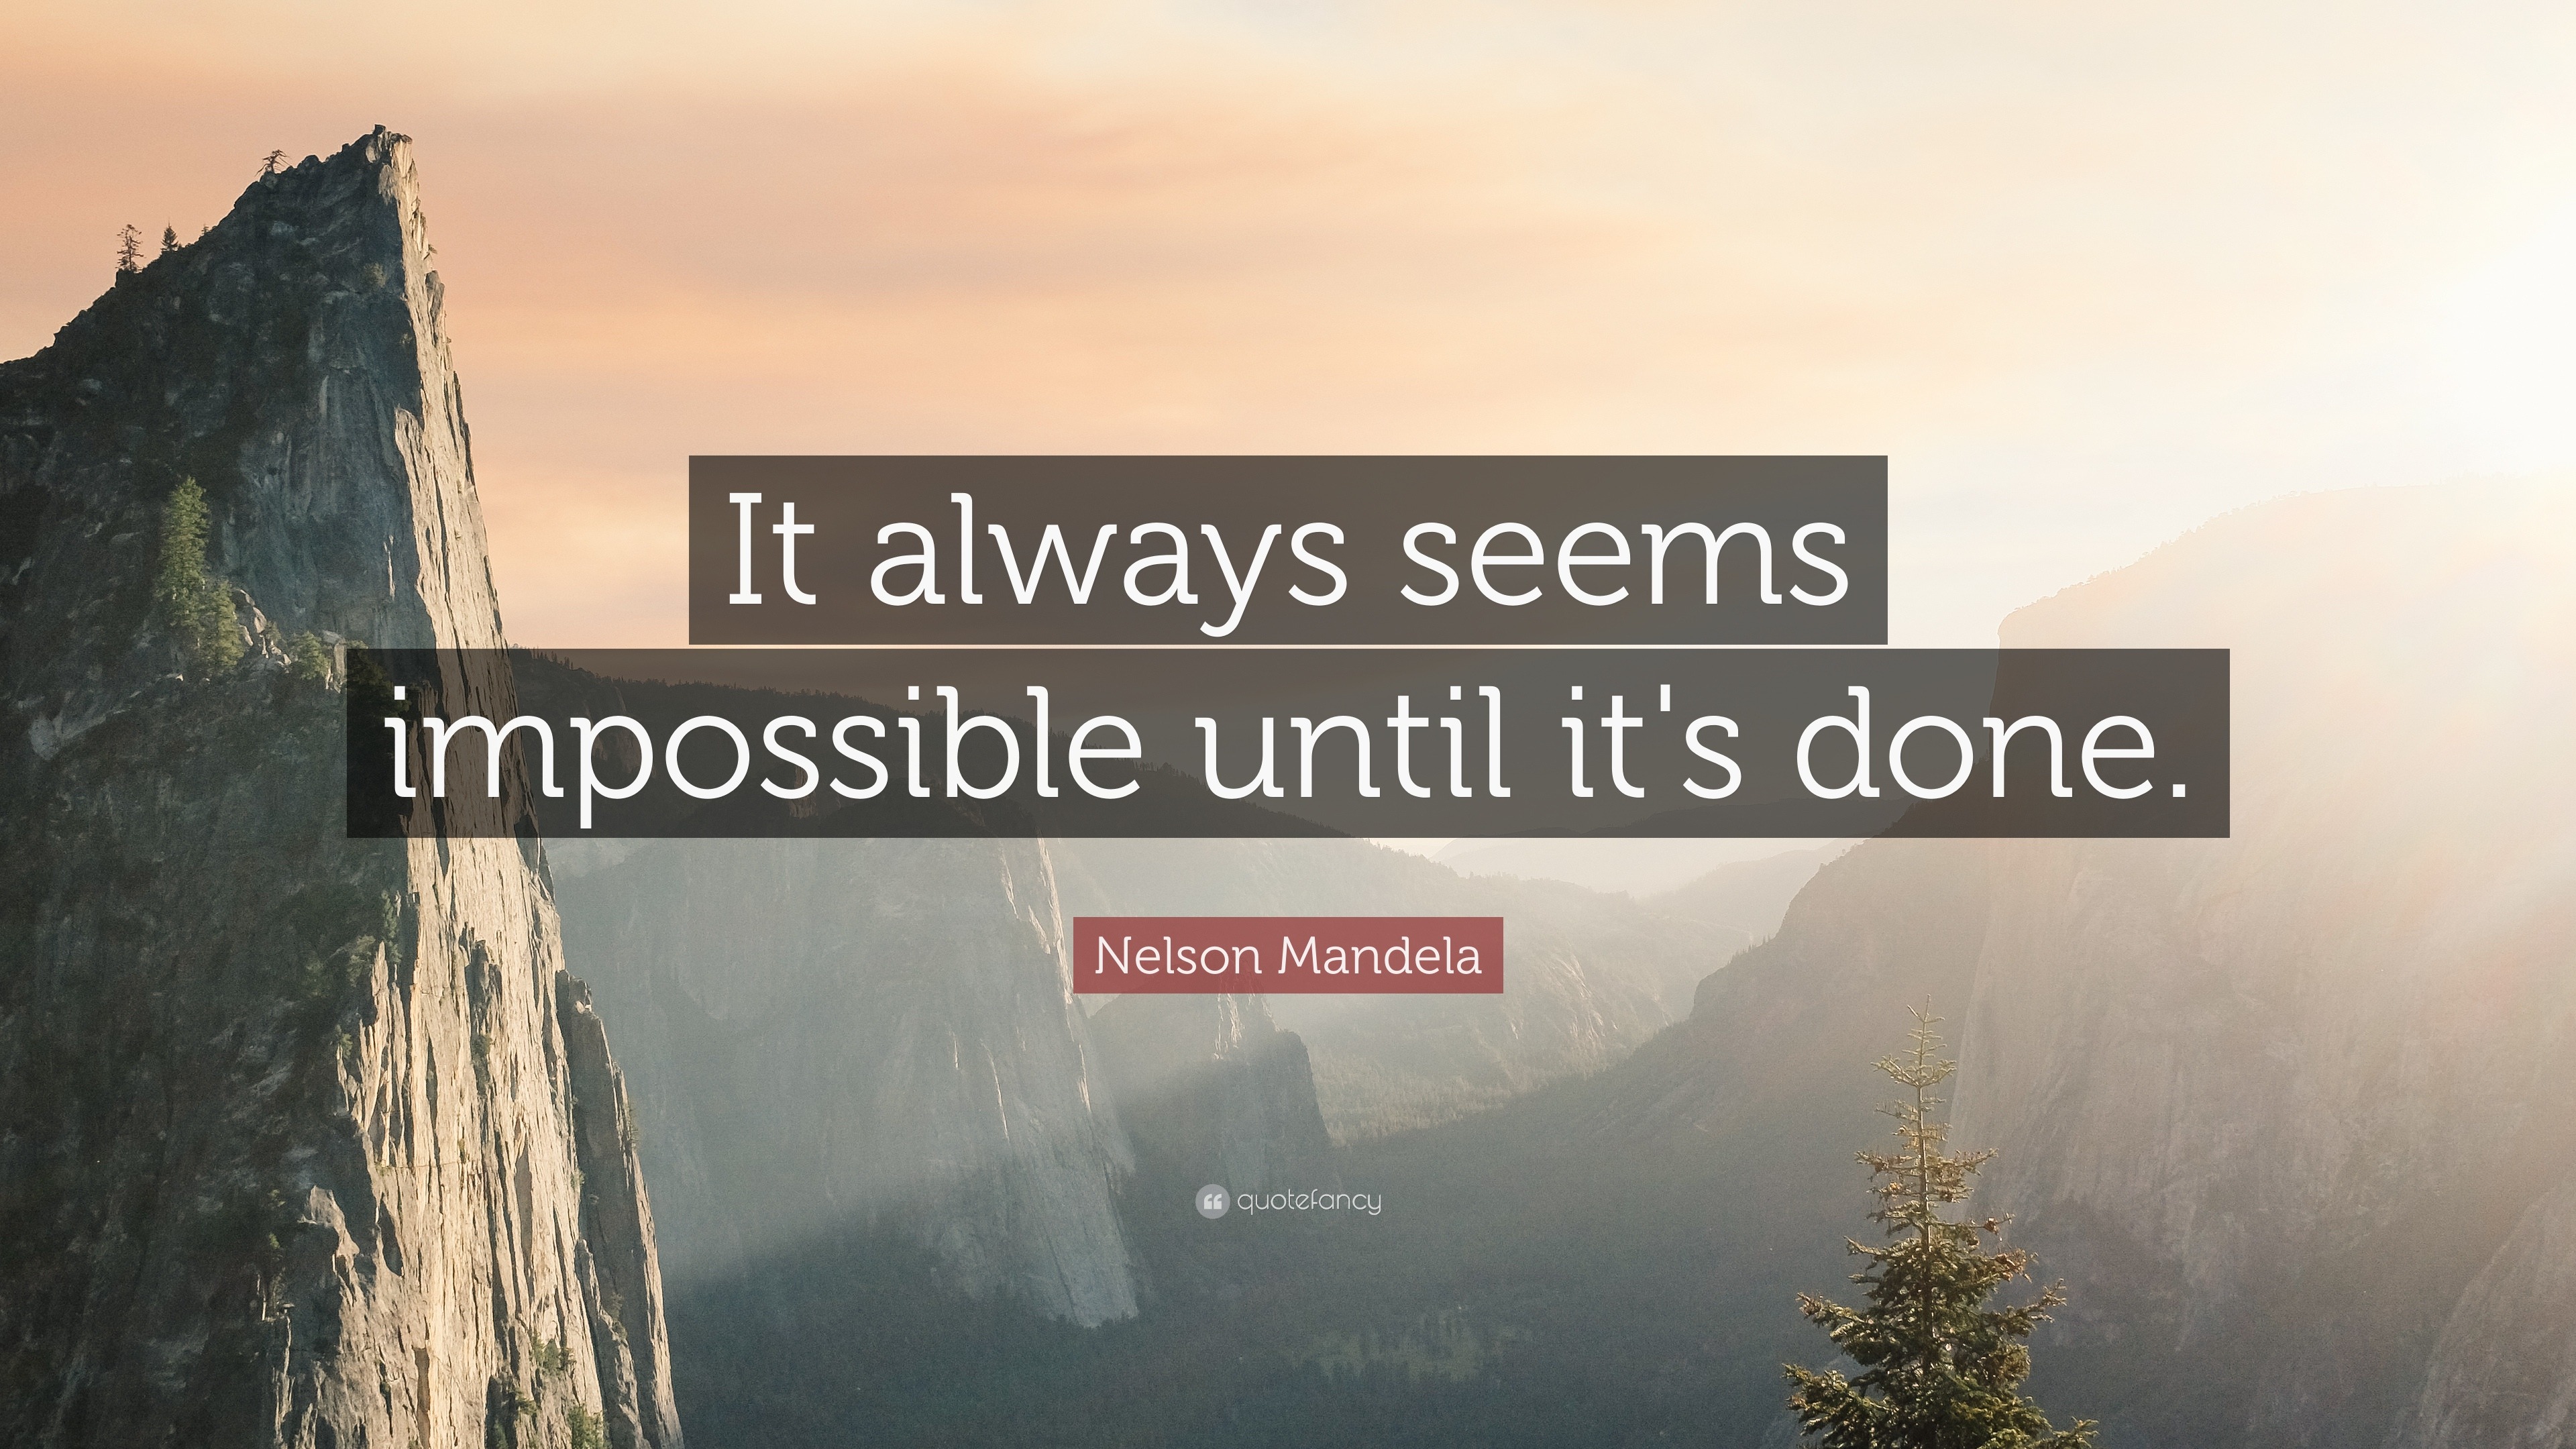 IT ALWAYS SEEMS IMPOSSIBLE UNTIL IT'S DONE  Motivational Quote NELSON MANDELA 